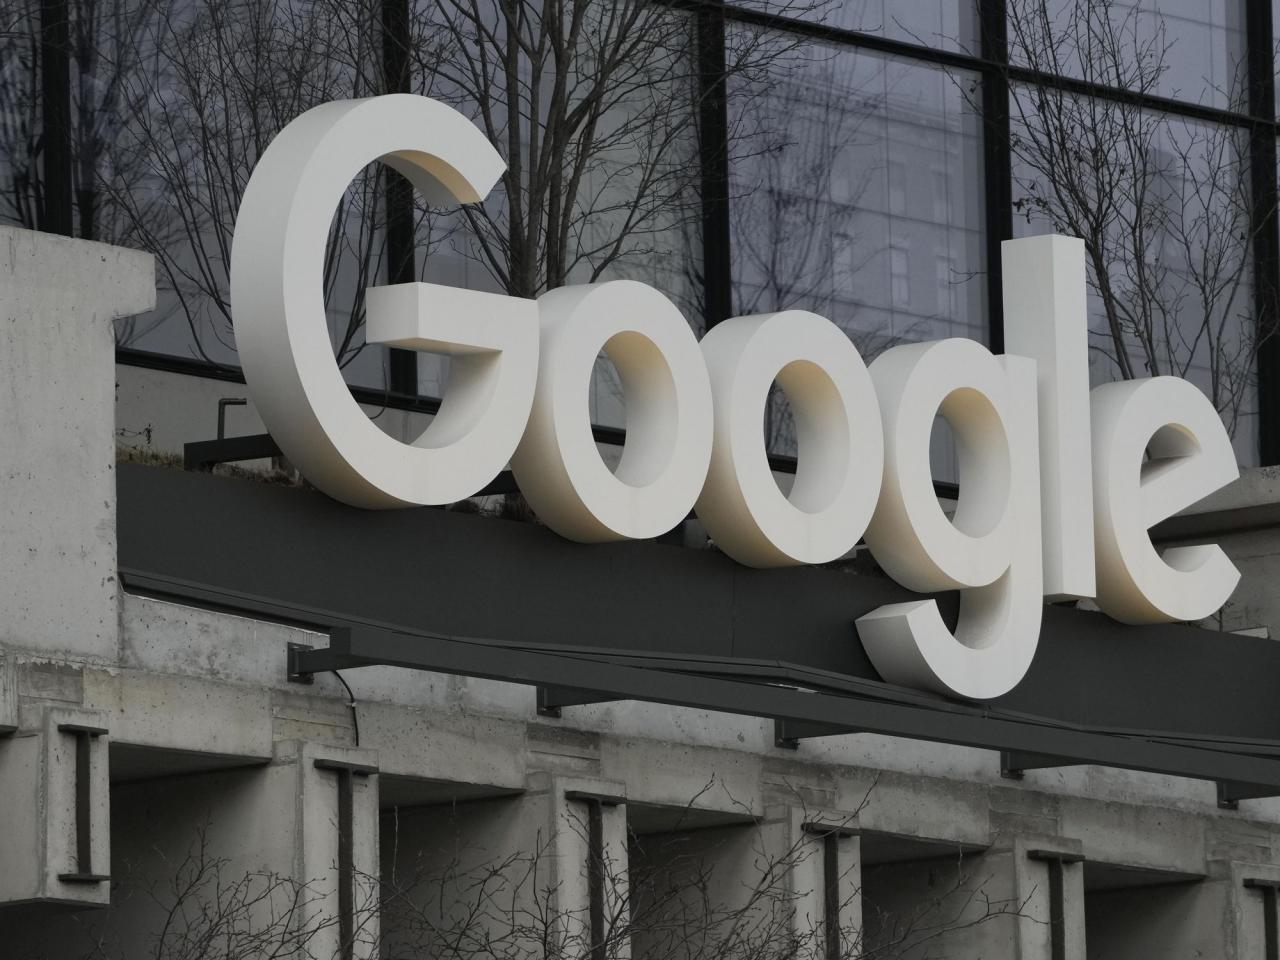 Google to purge billions of files containing personal data in settlement of Chrome privacy case